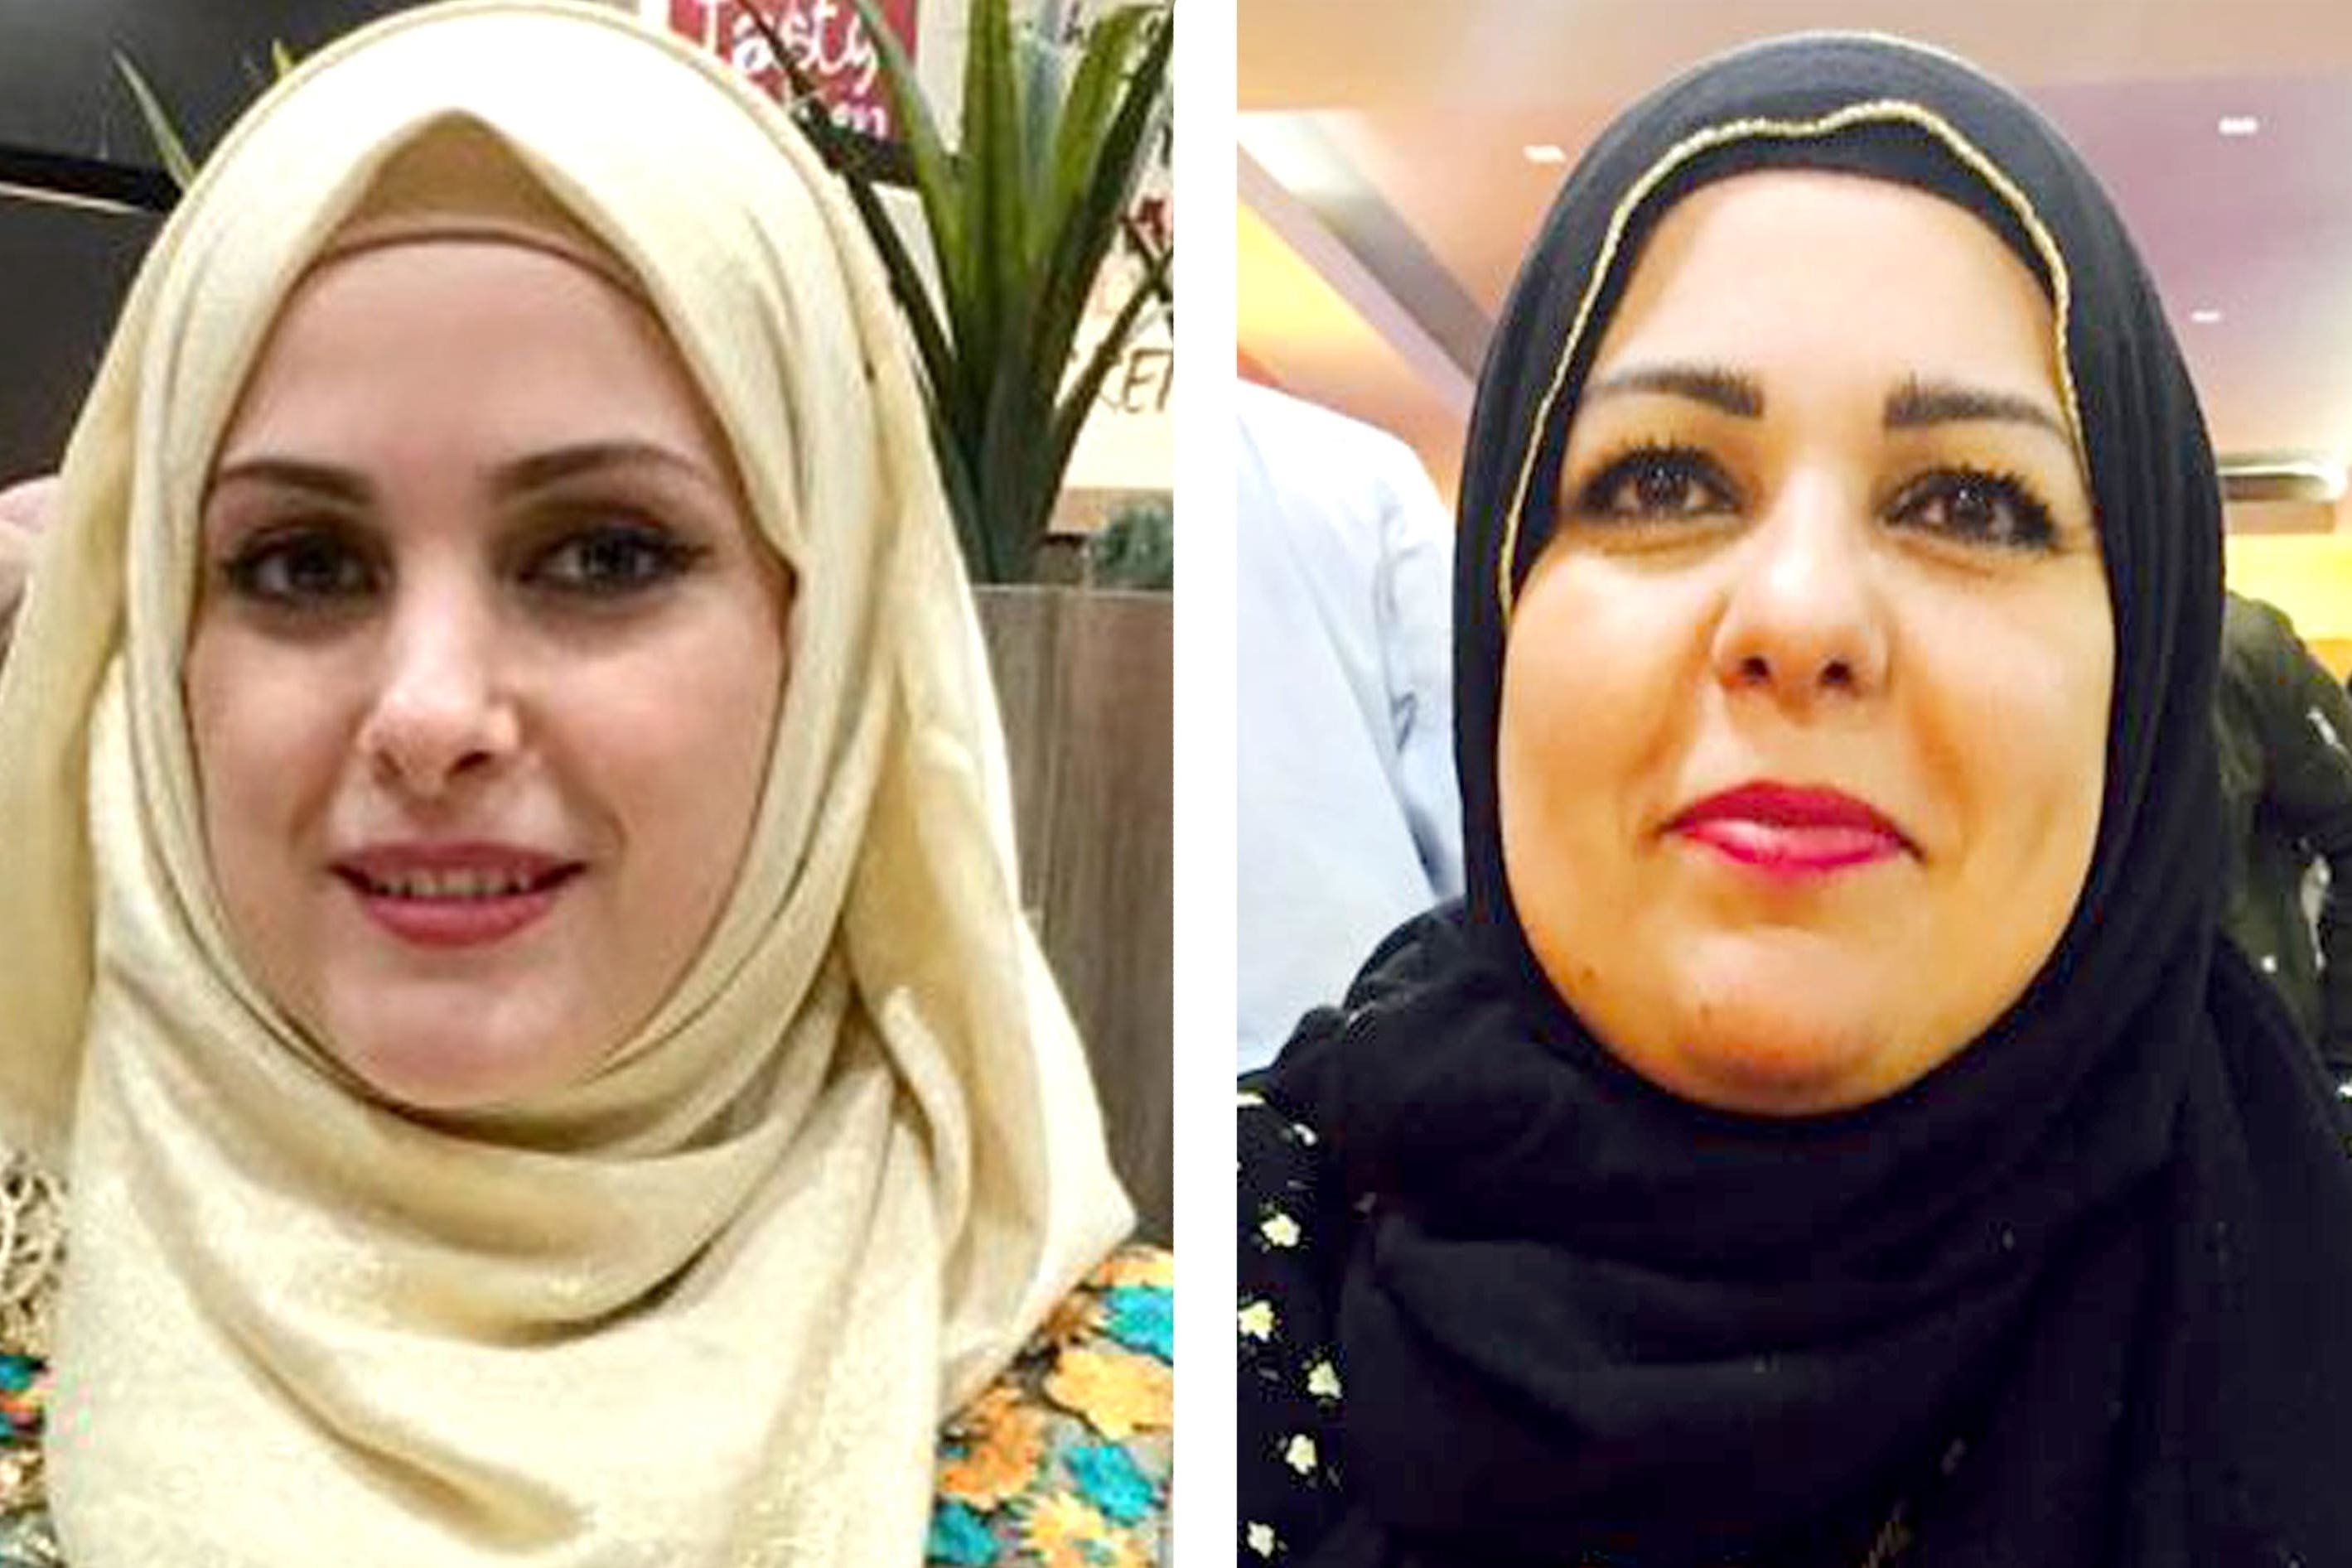 Raneem Oudeh (left) and her mother, Khaola Saleem, were both killed